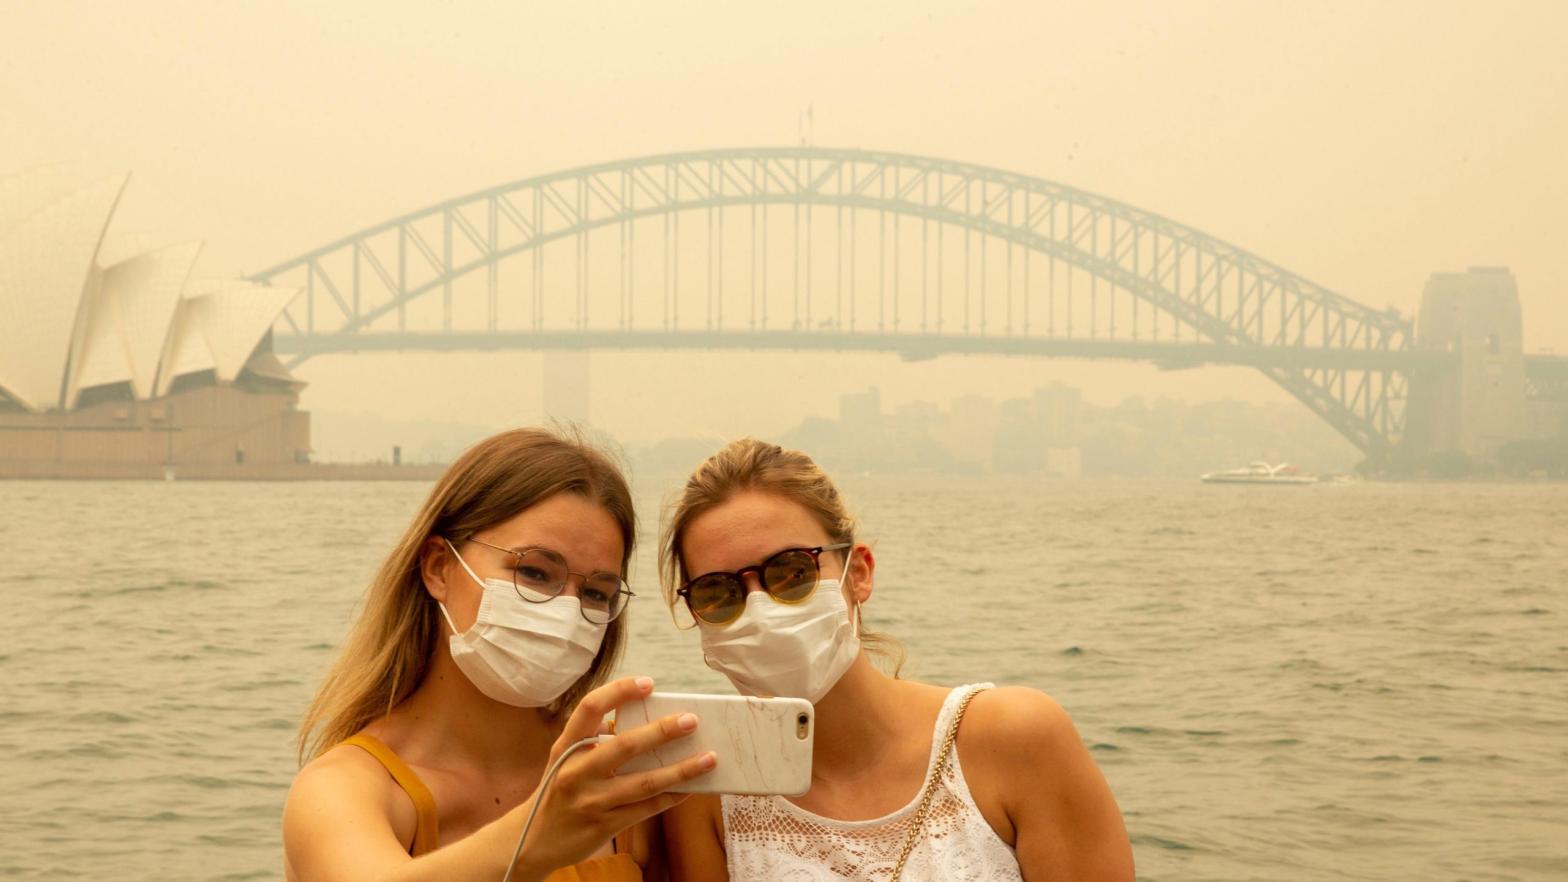 Tourists take a selfie while wearing face masks due to heavy smoke (this is pre-pandemic!) on Dec. 19, 2019 in Sydney, Australia. (Photo: Jenny Evans, Getty Images)